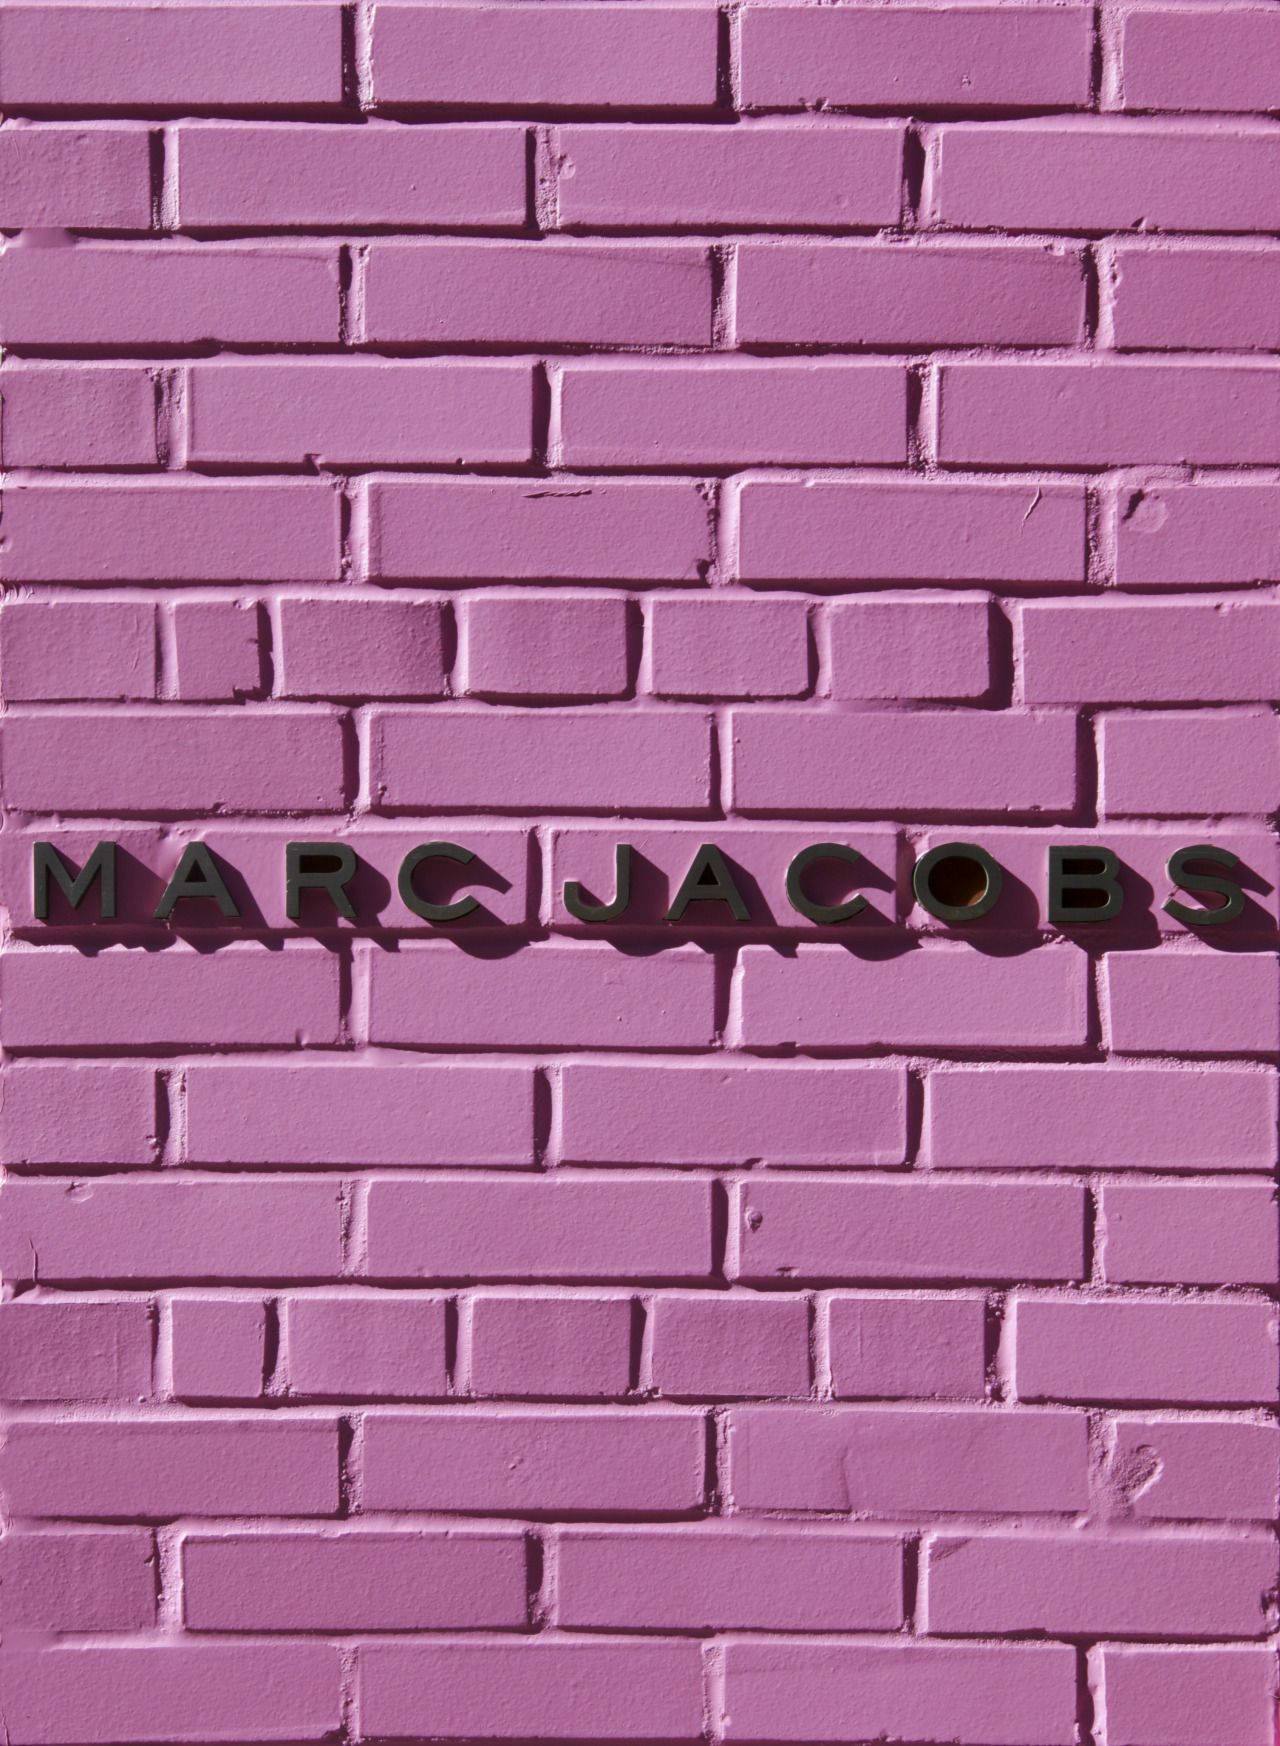 MARC JACOBS. Picture collage wall, Bedroom wall collage, Photo wall collage